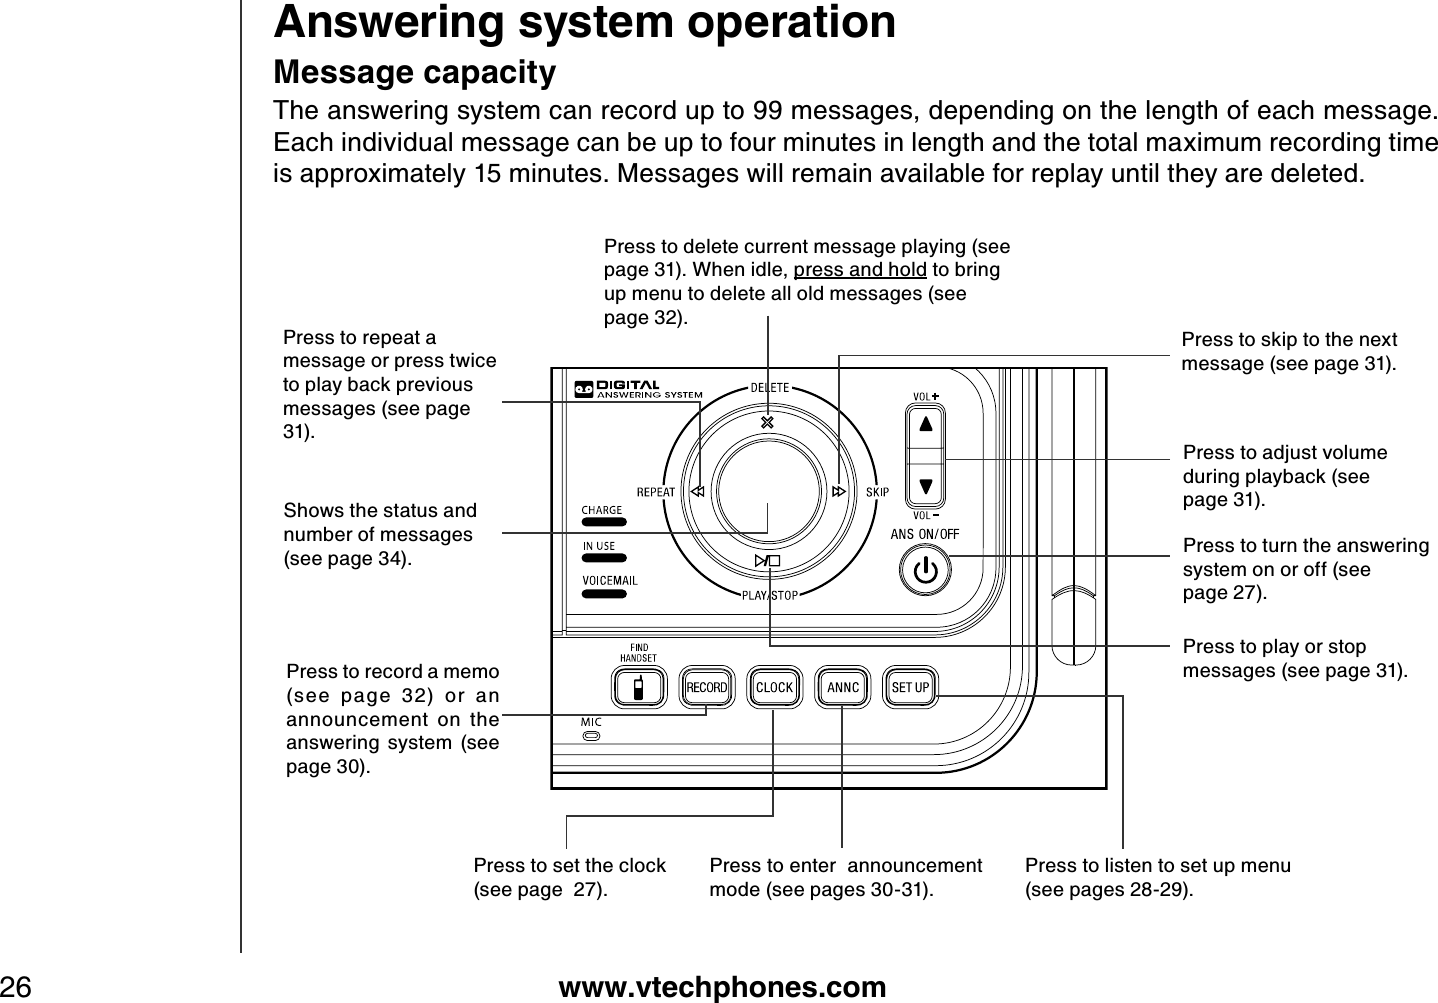 www.vtechphones.com26Answering system operationMessage capacityThe answering system can record up to 99 messages, depending on the length of each message. Each individual message can be up to four minutes in length and the total maximum recording time is approximately 15 minutes. Messages will remain available for replay until they are deleted.Press to play or stop messages (see page 31).Press to repeat a message or press twice to play back previous messages (see page 31).Shows the status and number of messages (see page 34).Press to record a memo (see  page  32)  or  an announcement  on  the answering  system  (see page 30).Press to set the clock (see page  27).Press to enter  announcement mode (see pages 30-31).Press to listen to set up menu (see pages 28-29).Press to turn the answering system on or off (see page 27).Press to adjust volume during playback (see page 31).Press to skip to the next message (see page 31).Press to delete current message playing (see page 31). When idle, press and hold to bring up menu to delete all old messages (see page 32).